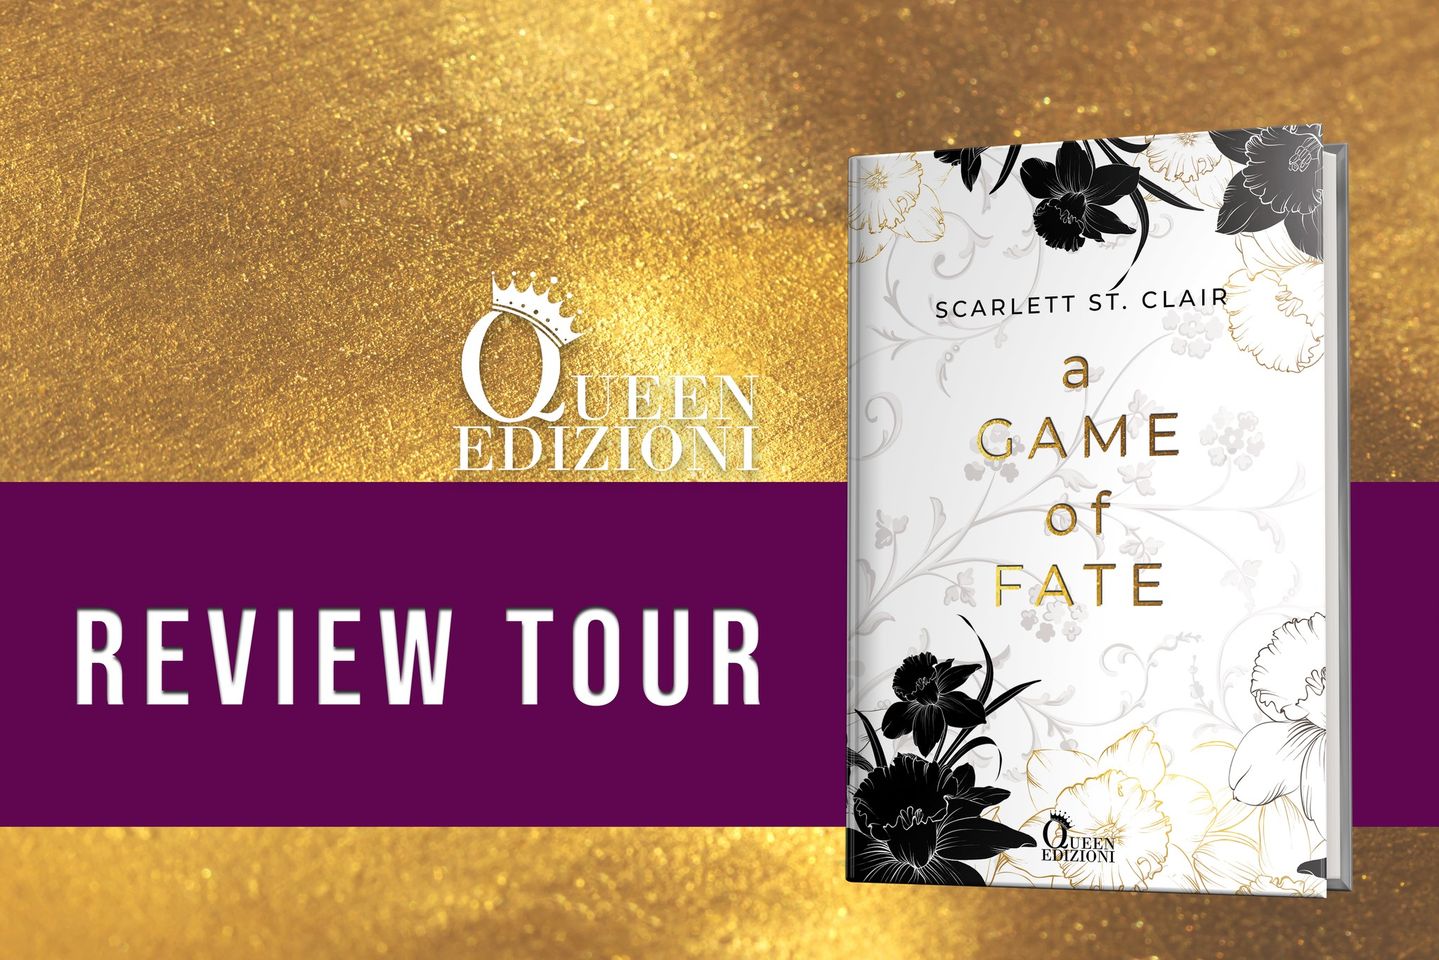 A Game Of Fate review tour